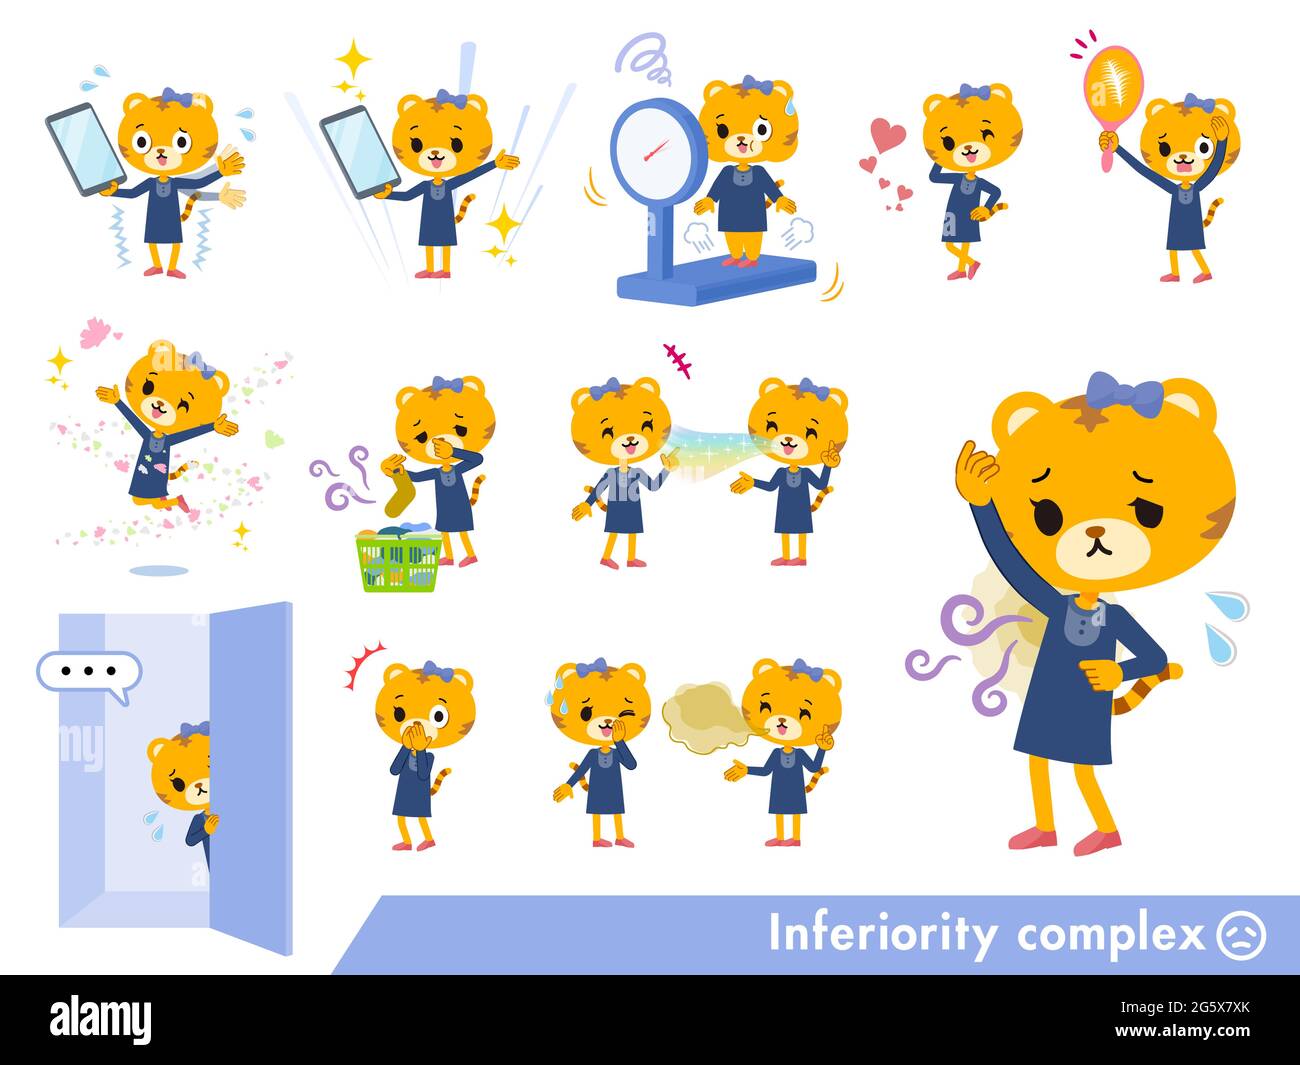 A set of Tiger girl on inferiority complex.It's vector art so it's easy to edit. Stock Vector